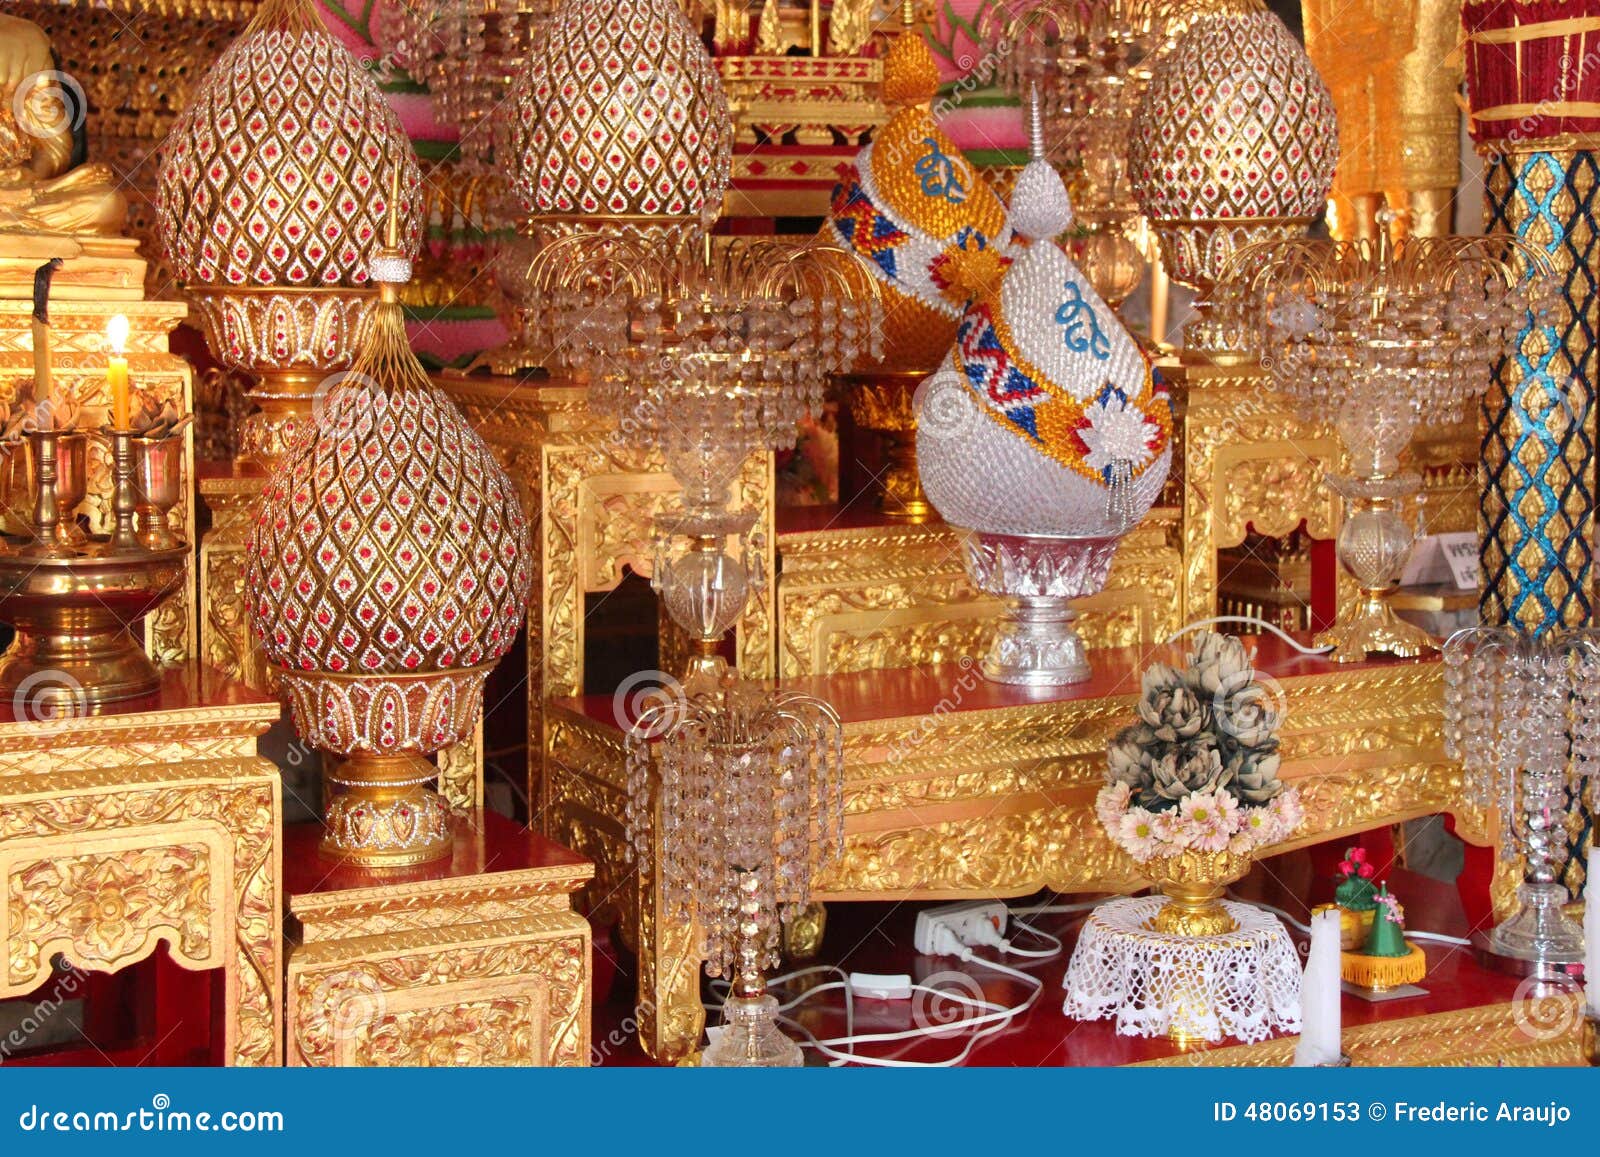 golden offerings are placed on altars (thailand)